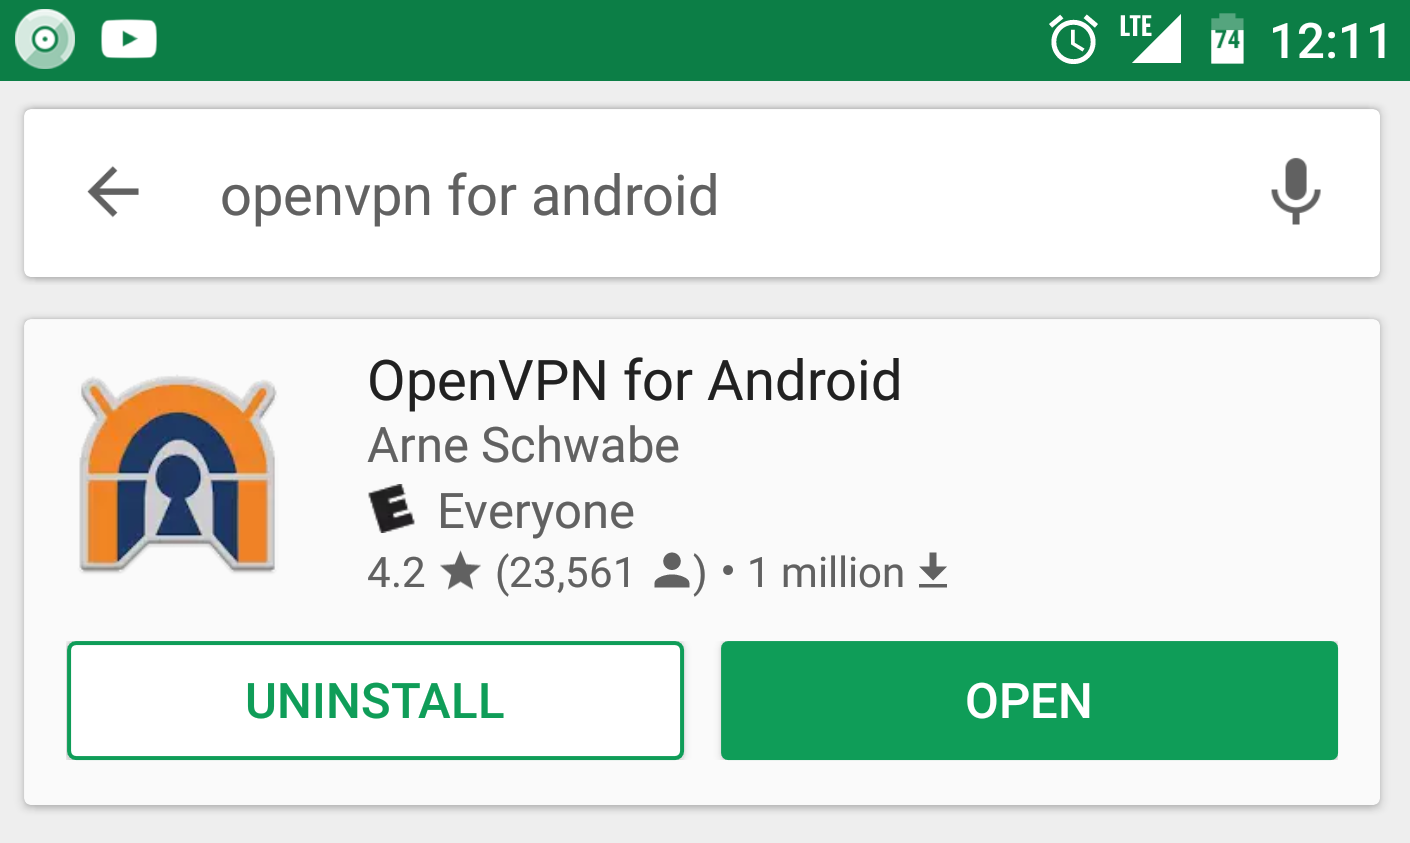 windows home server 2011 openvpn for android